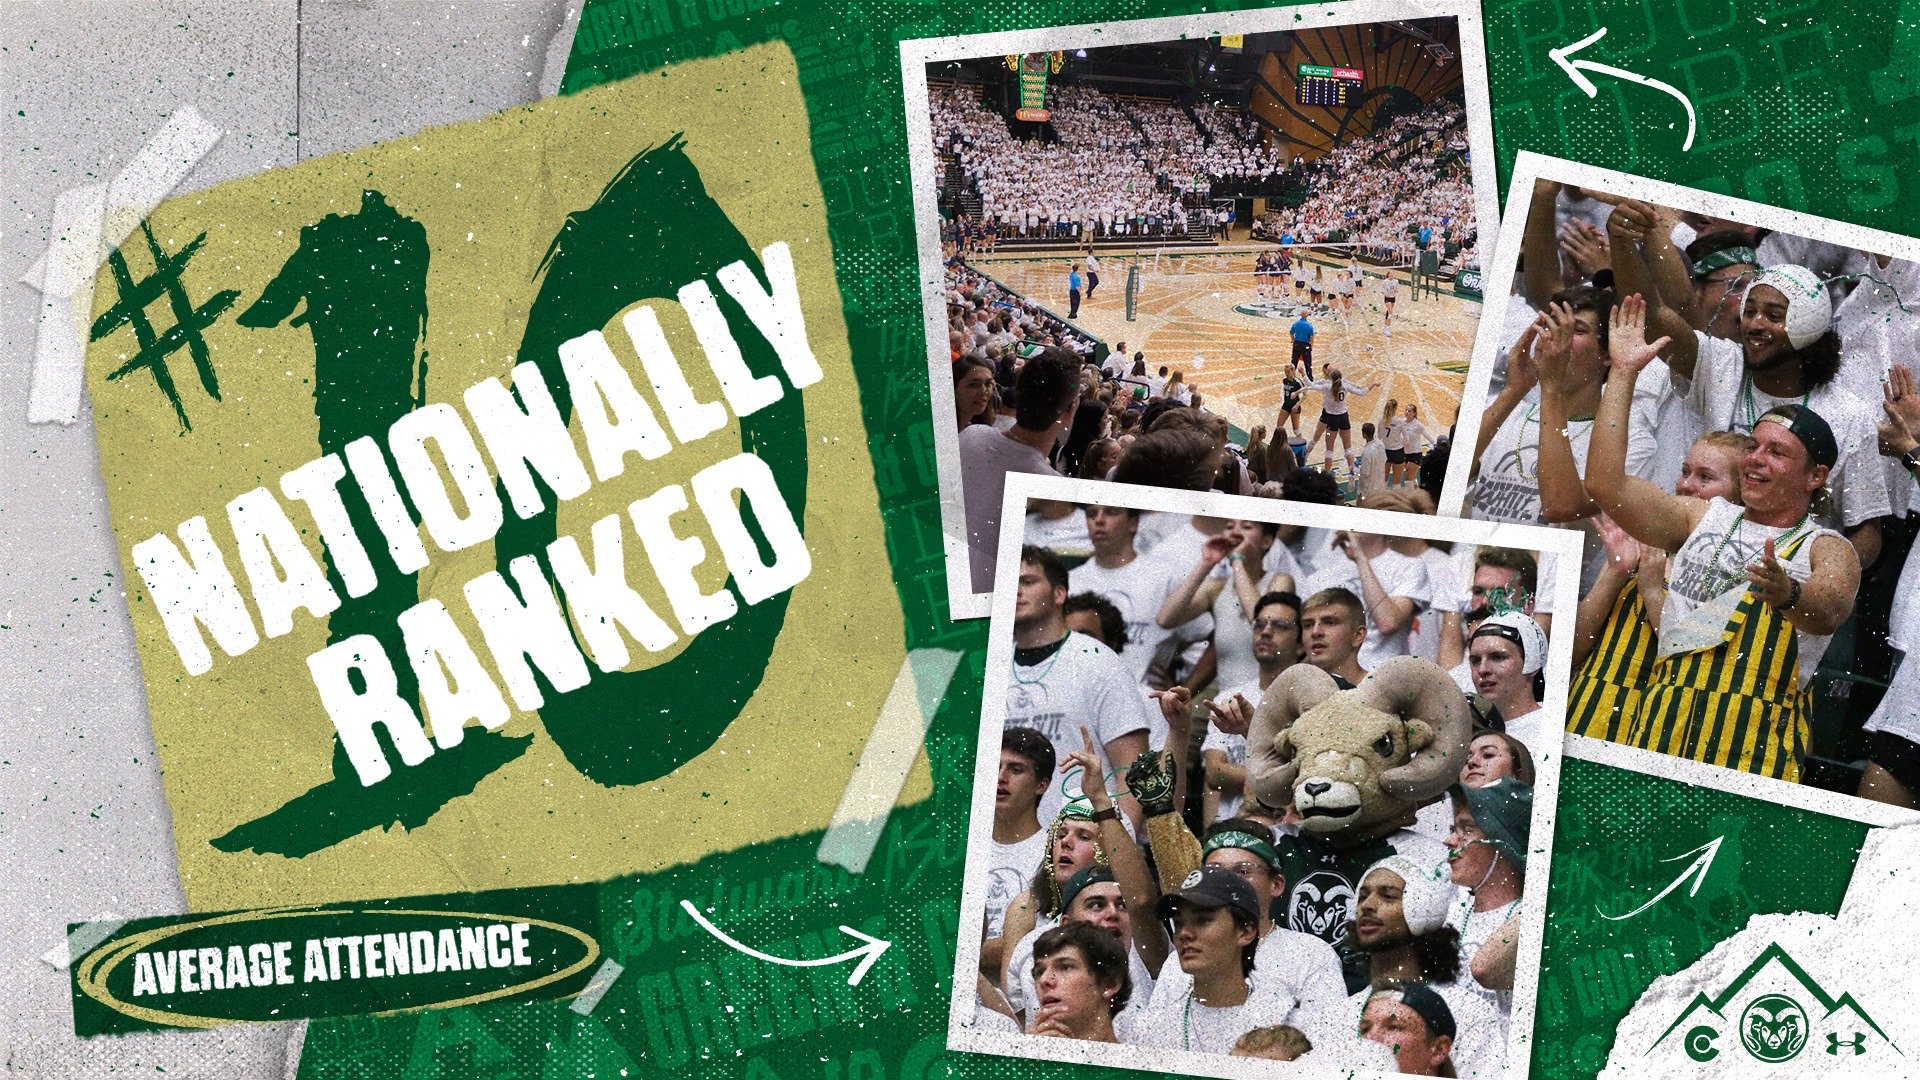 Colorado State volleyball attendance ranking